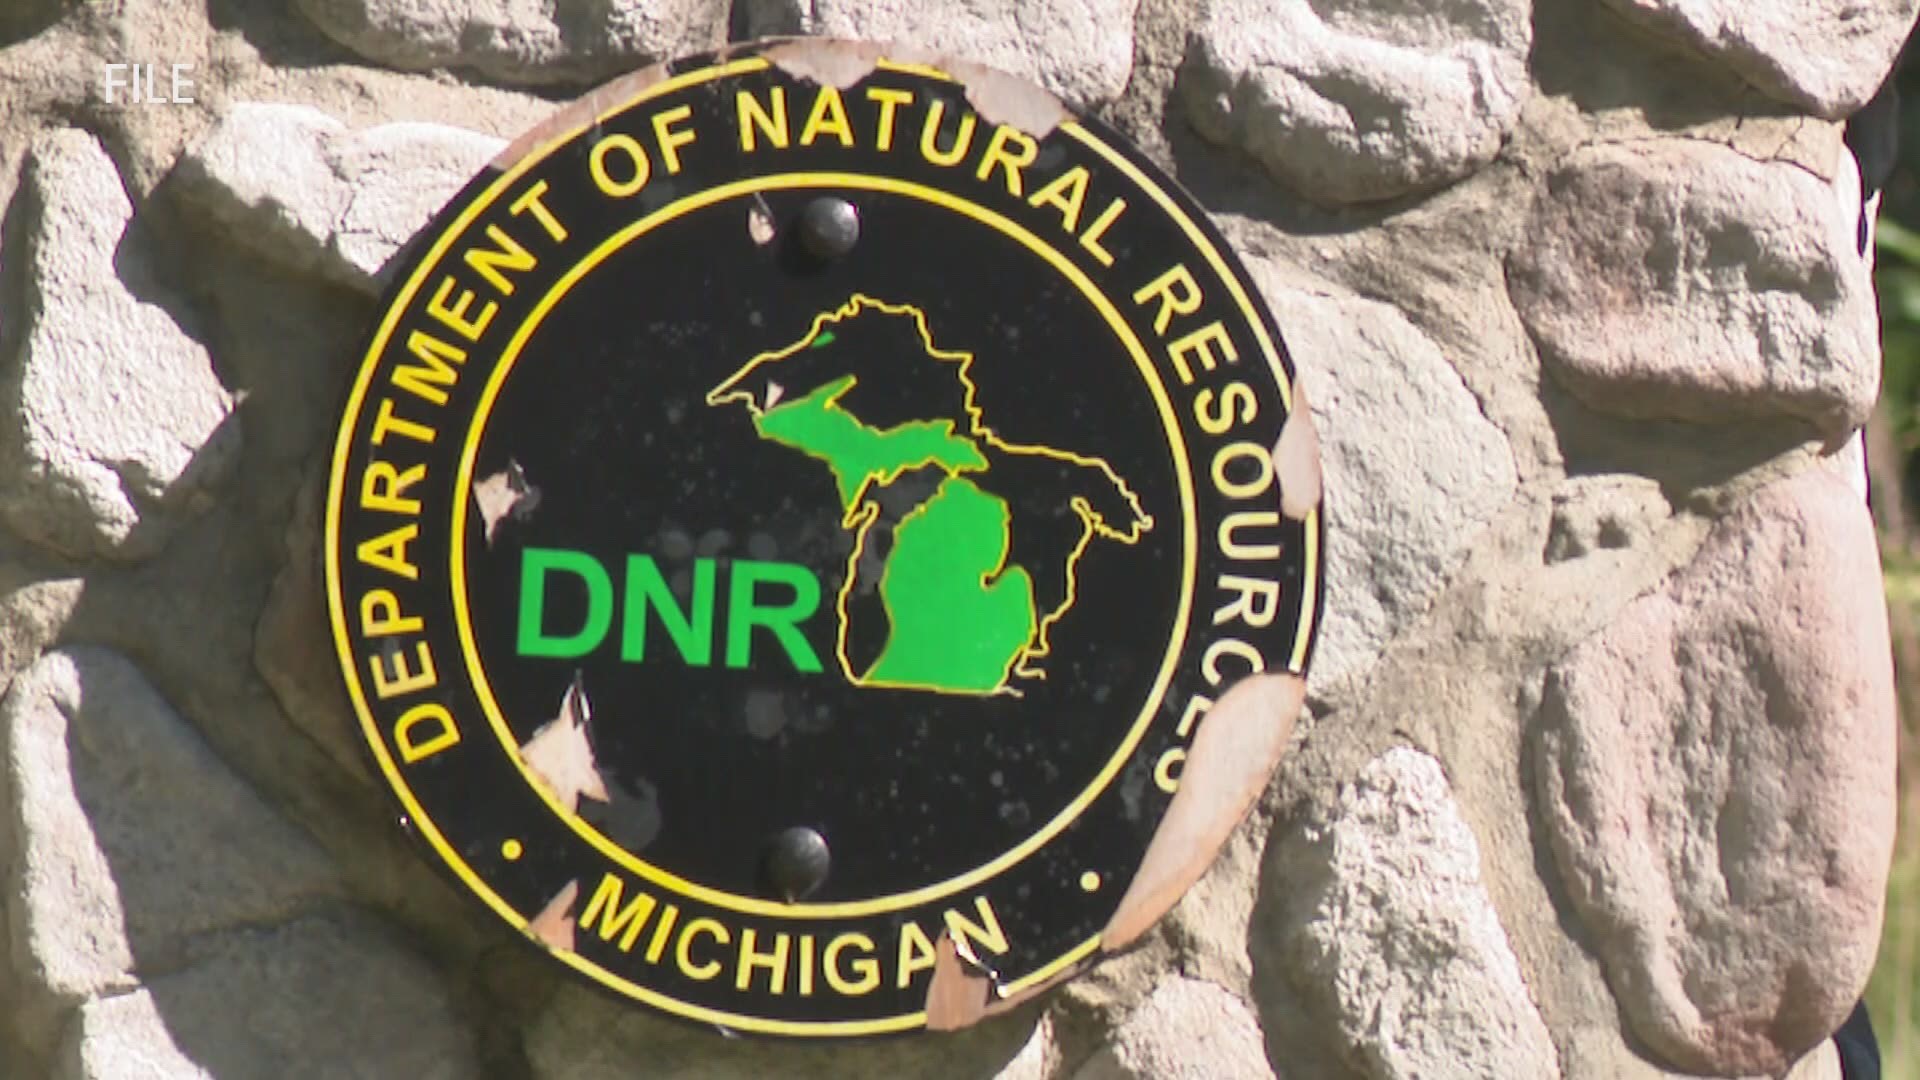 Reservations for campsites in the Michigan State Parks can be made six-months before the planned arrival date.